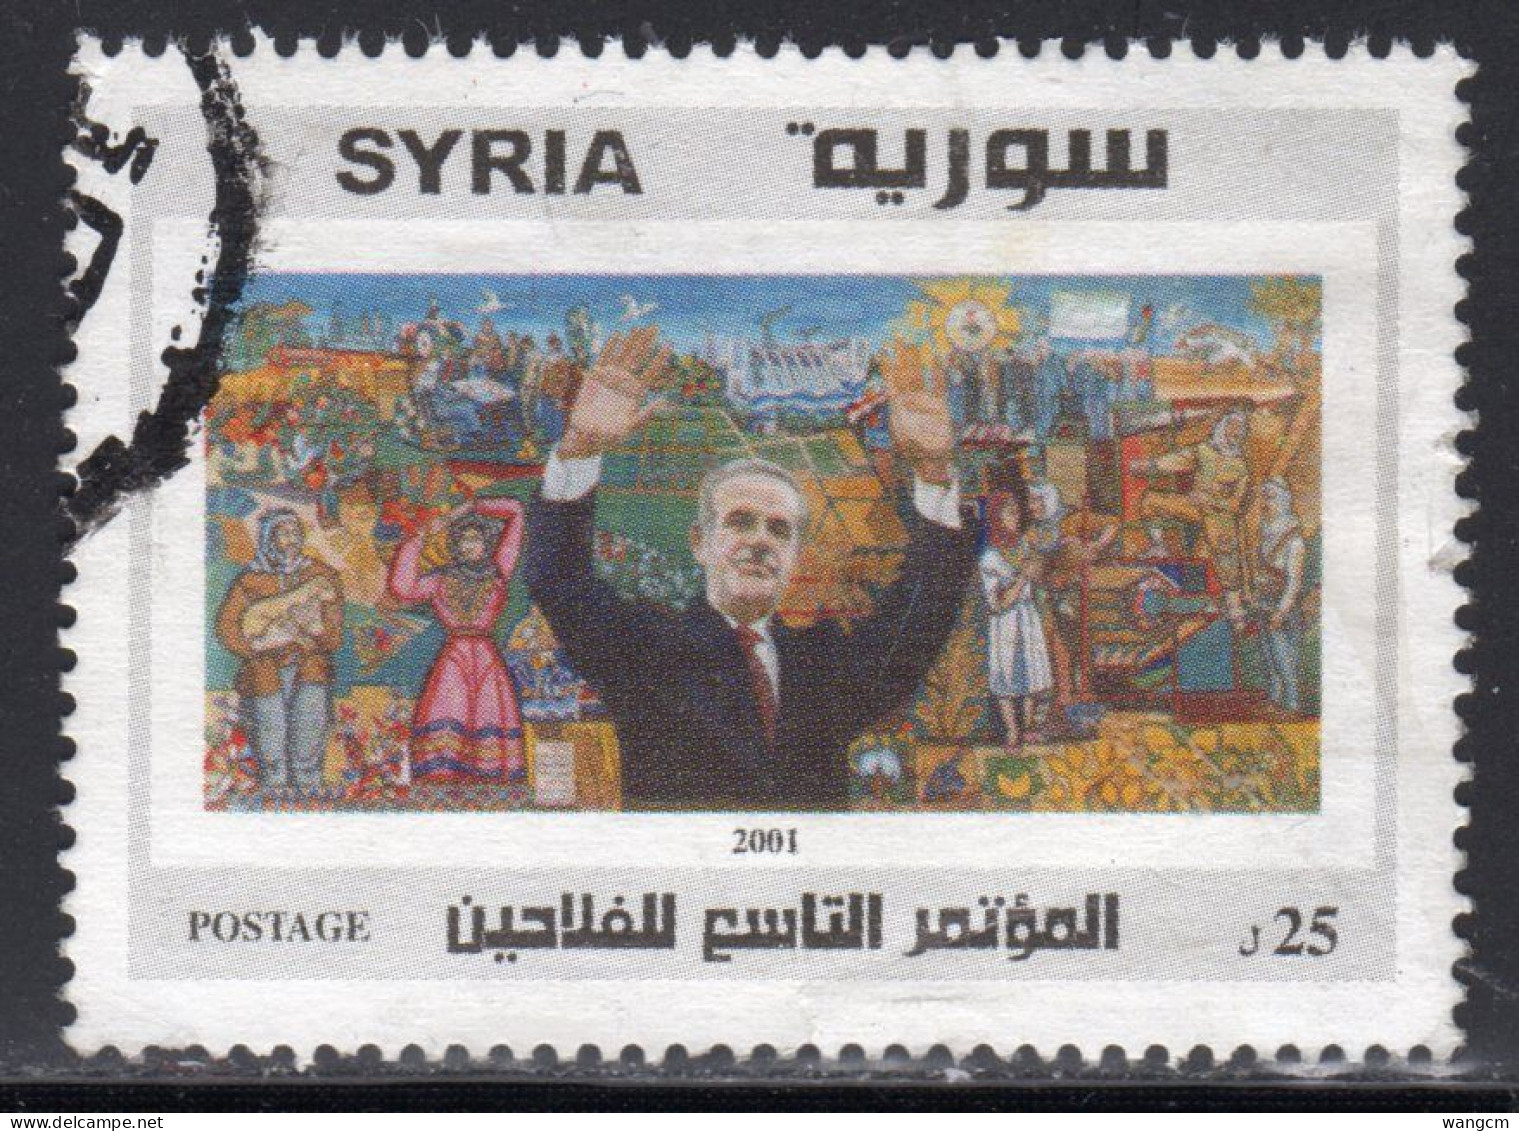 Syria 2001 9th Agricultural Congress Fine Used SG2067 - Agriculture